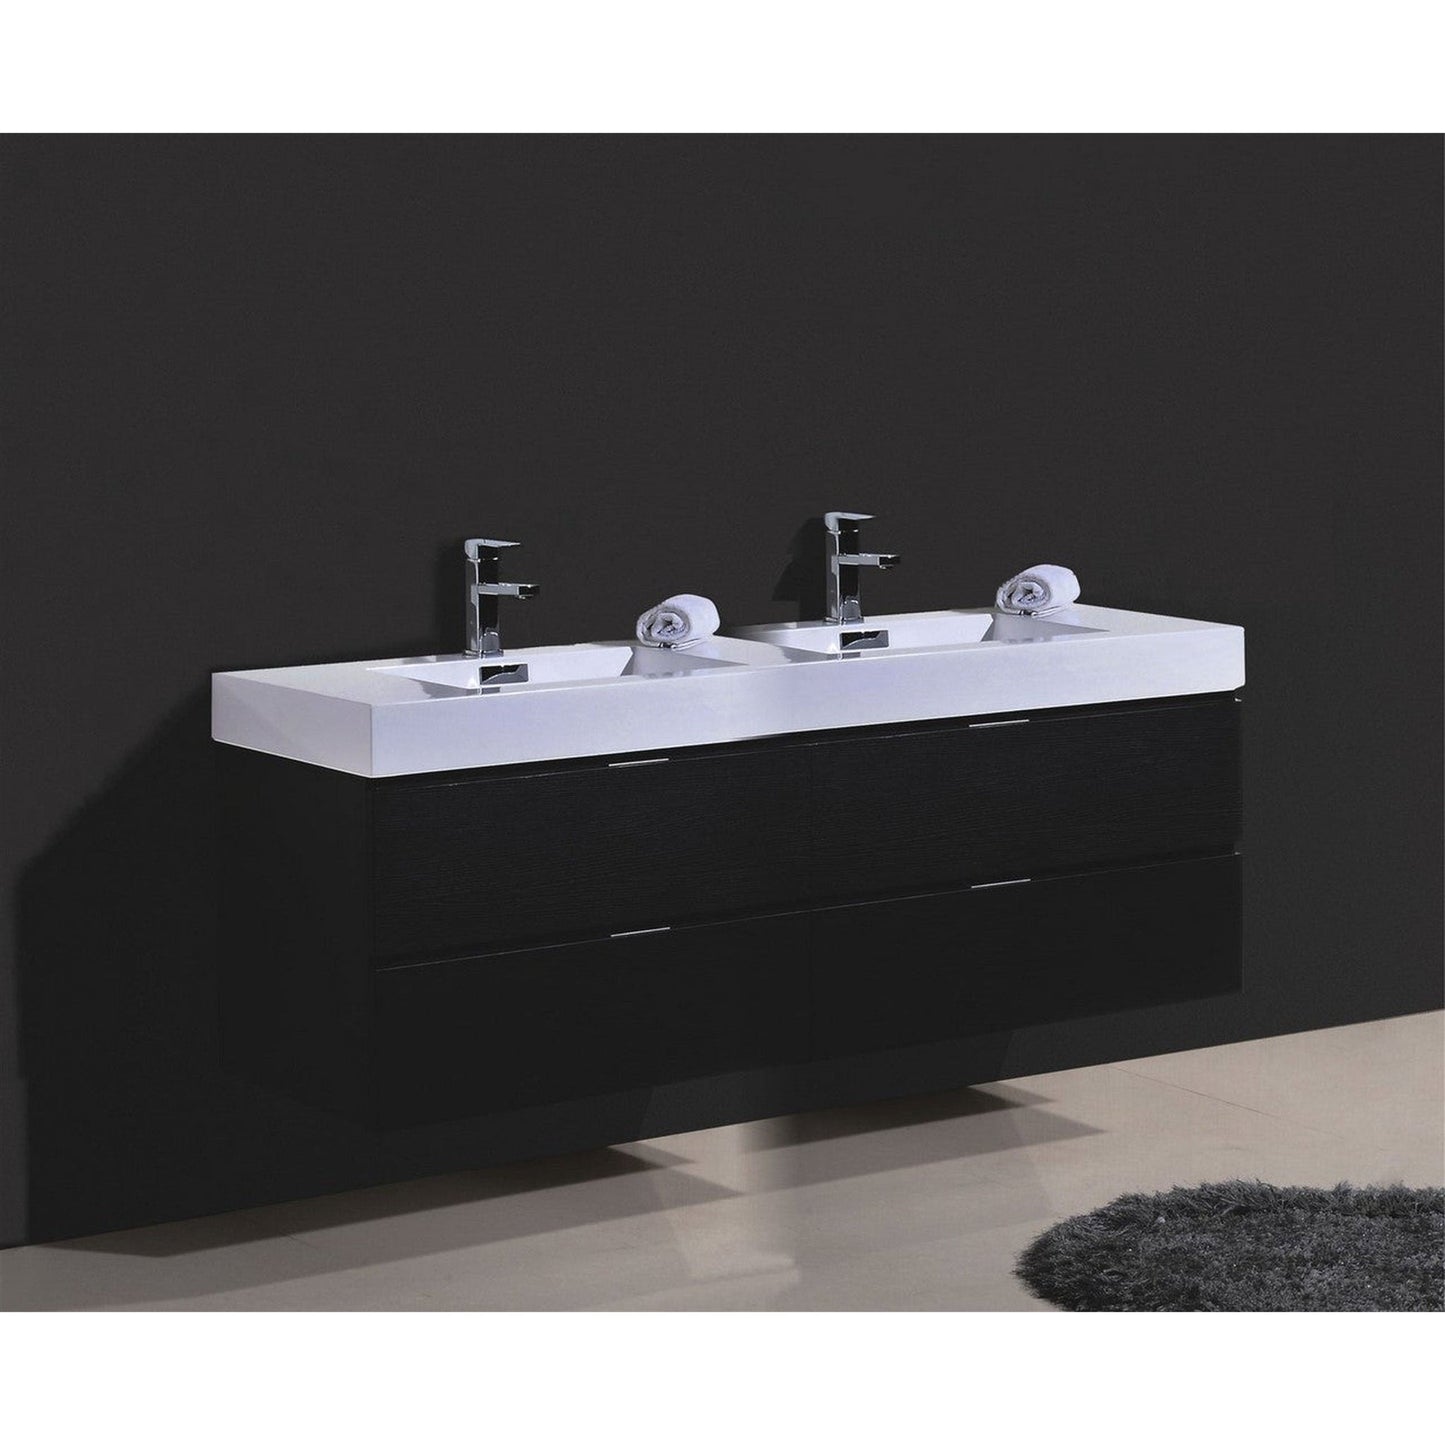 KubeBath Bliss 80" Black Wall-Mounted Modern Bathroom Vanity With Double Integrated Acrylic Sink With Overflow and 22" Black Framed Two Mirrors With Shelf